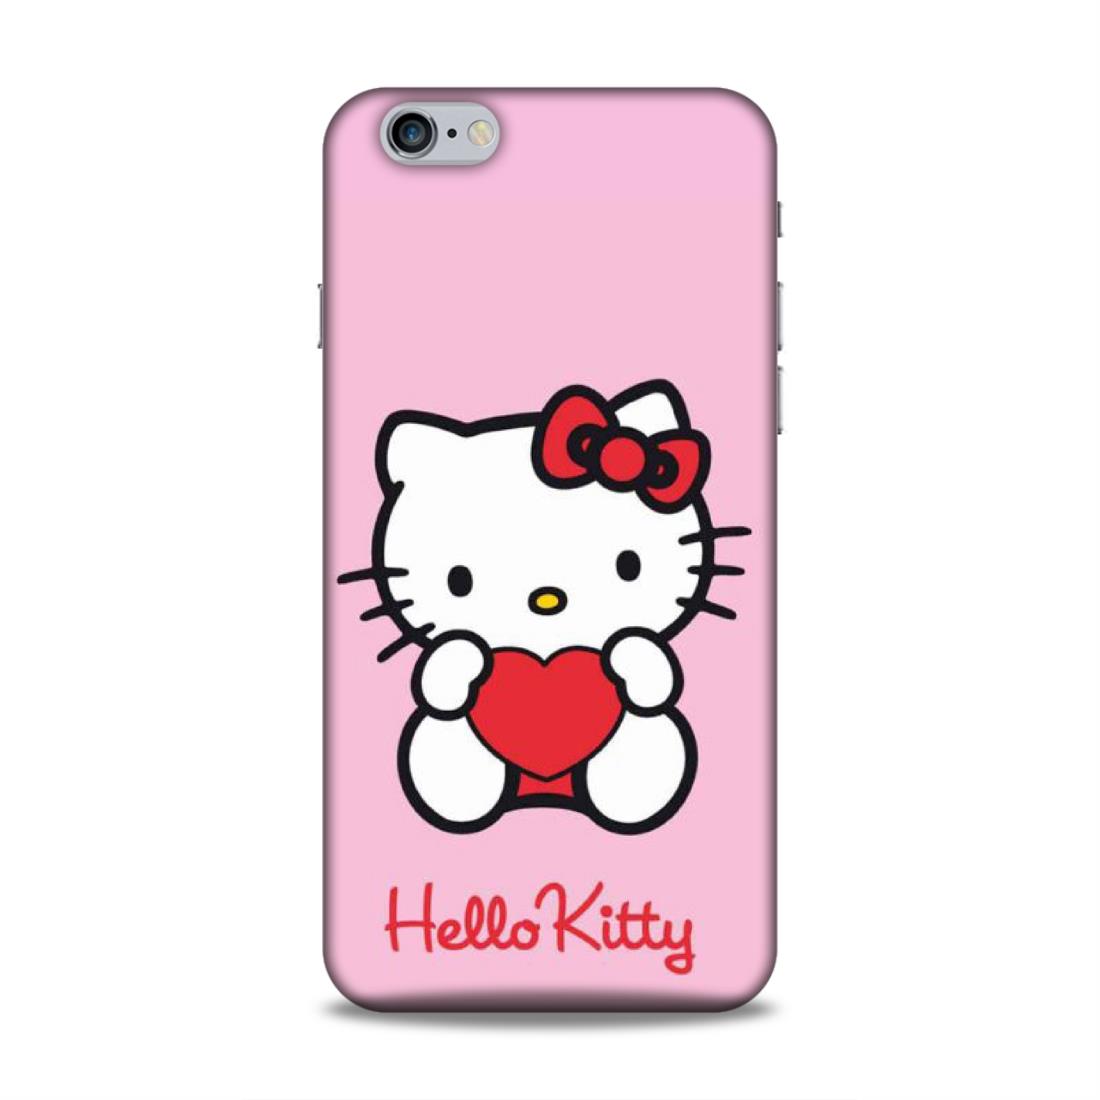 Hello Kitty in Pink Hard Back Case For Apple iPhone 6 Plus / 6s Plus